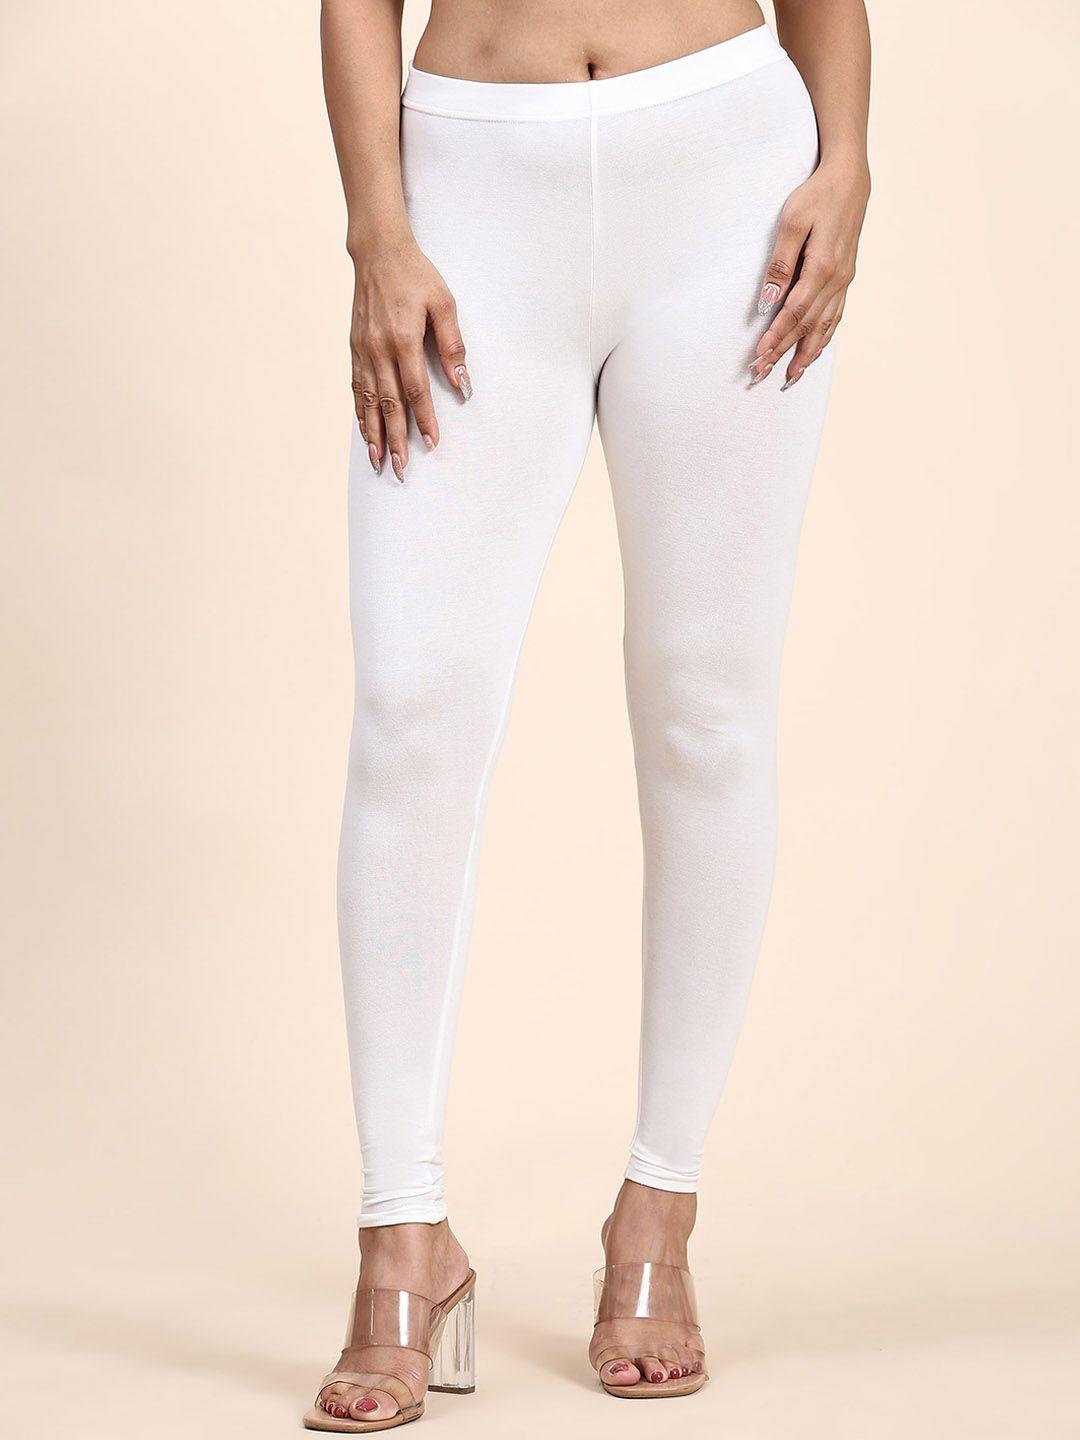 outflits skinny-fit ankle-length leggings